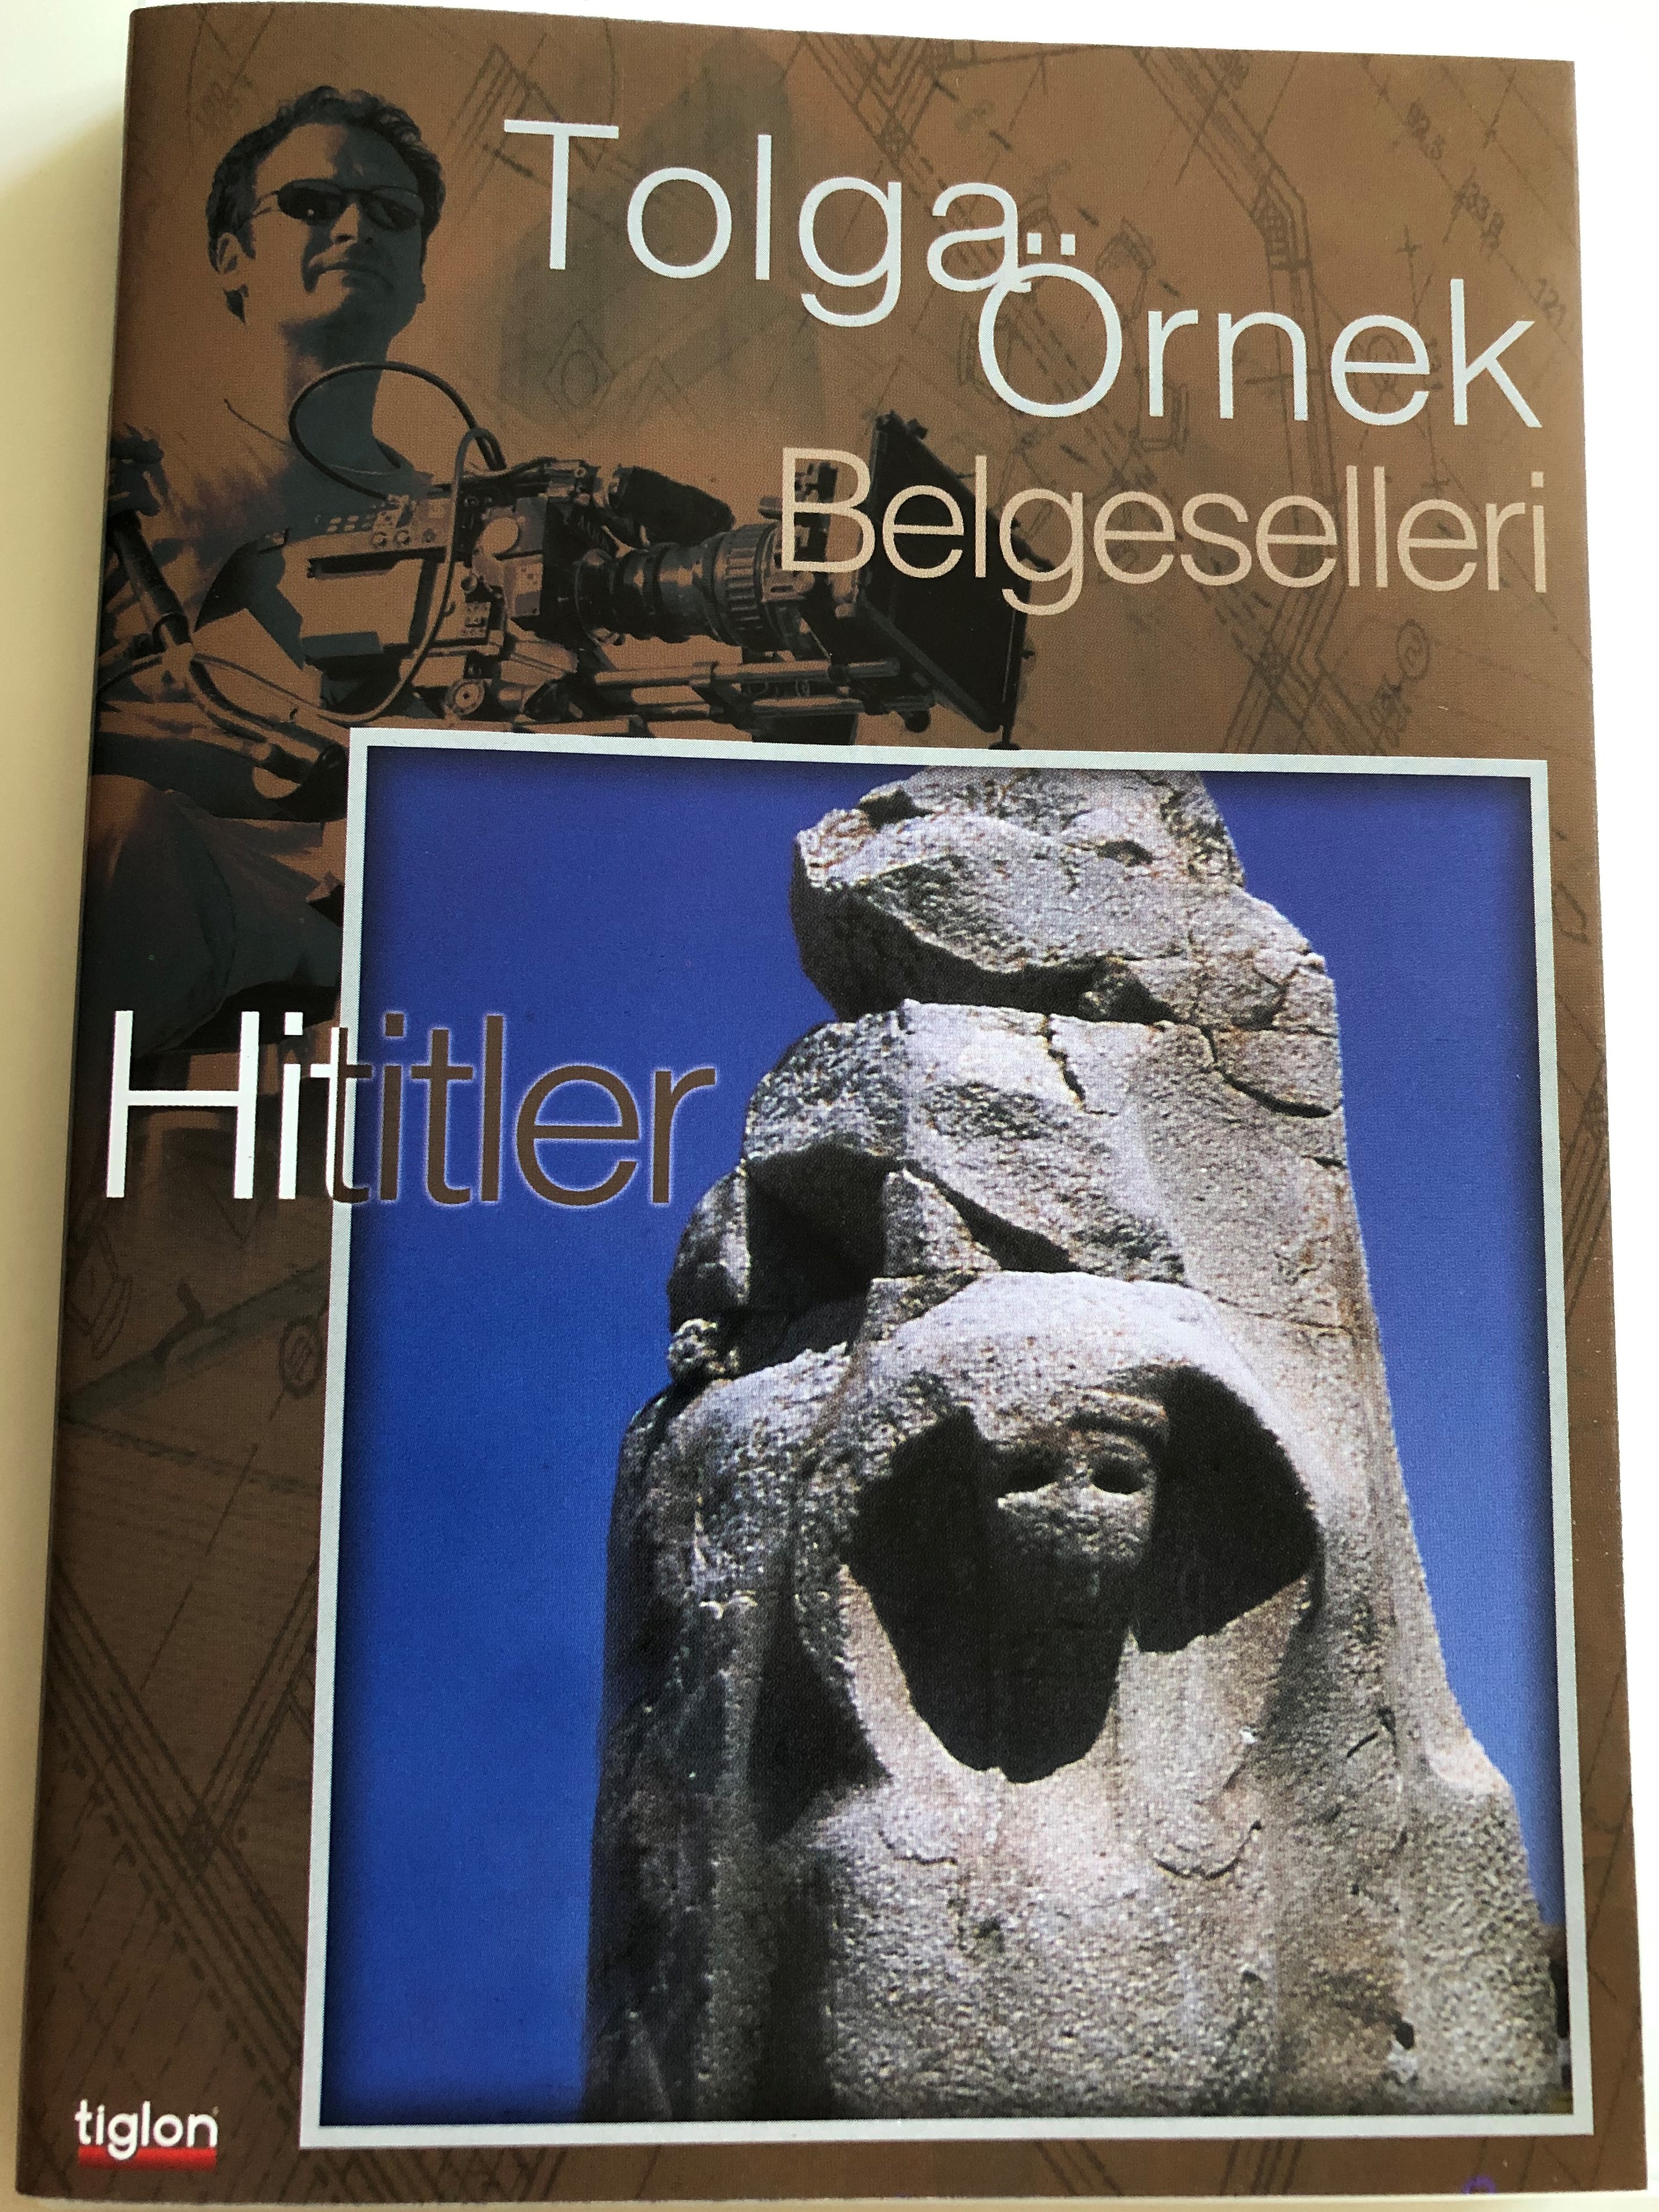 hititler-dvd-2003-the-hittites-directed-by-tolga-rnek-documentary-about-the-rise-and-fall-of-the-hittite-empire-narrated-by-jeremy-irons-1-.jpg